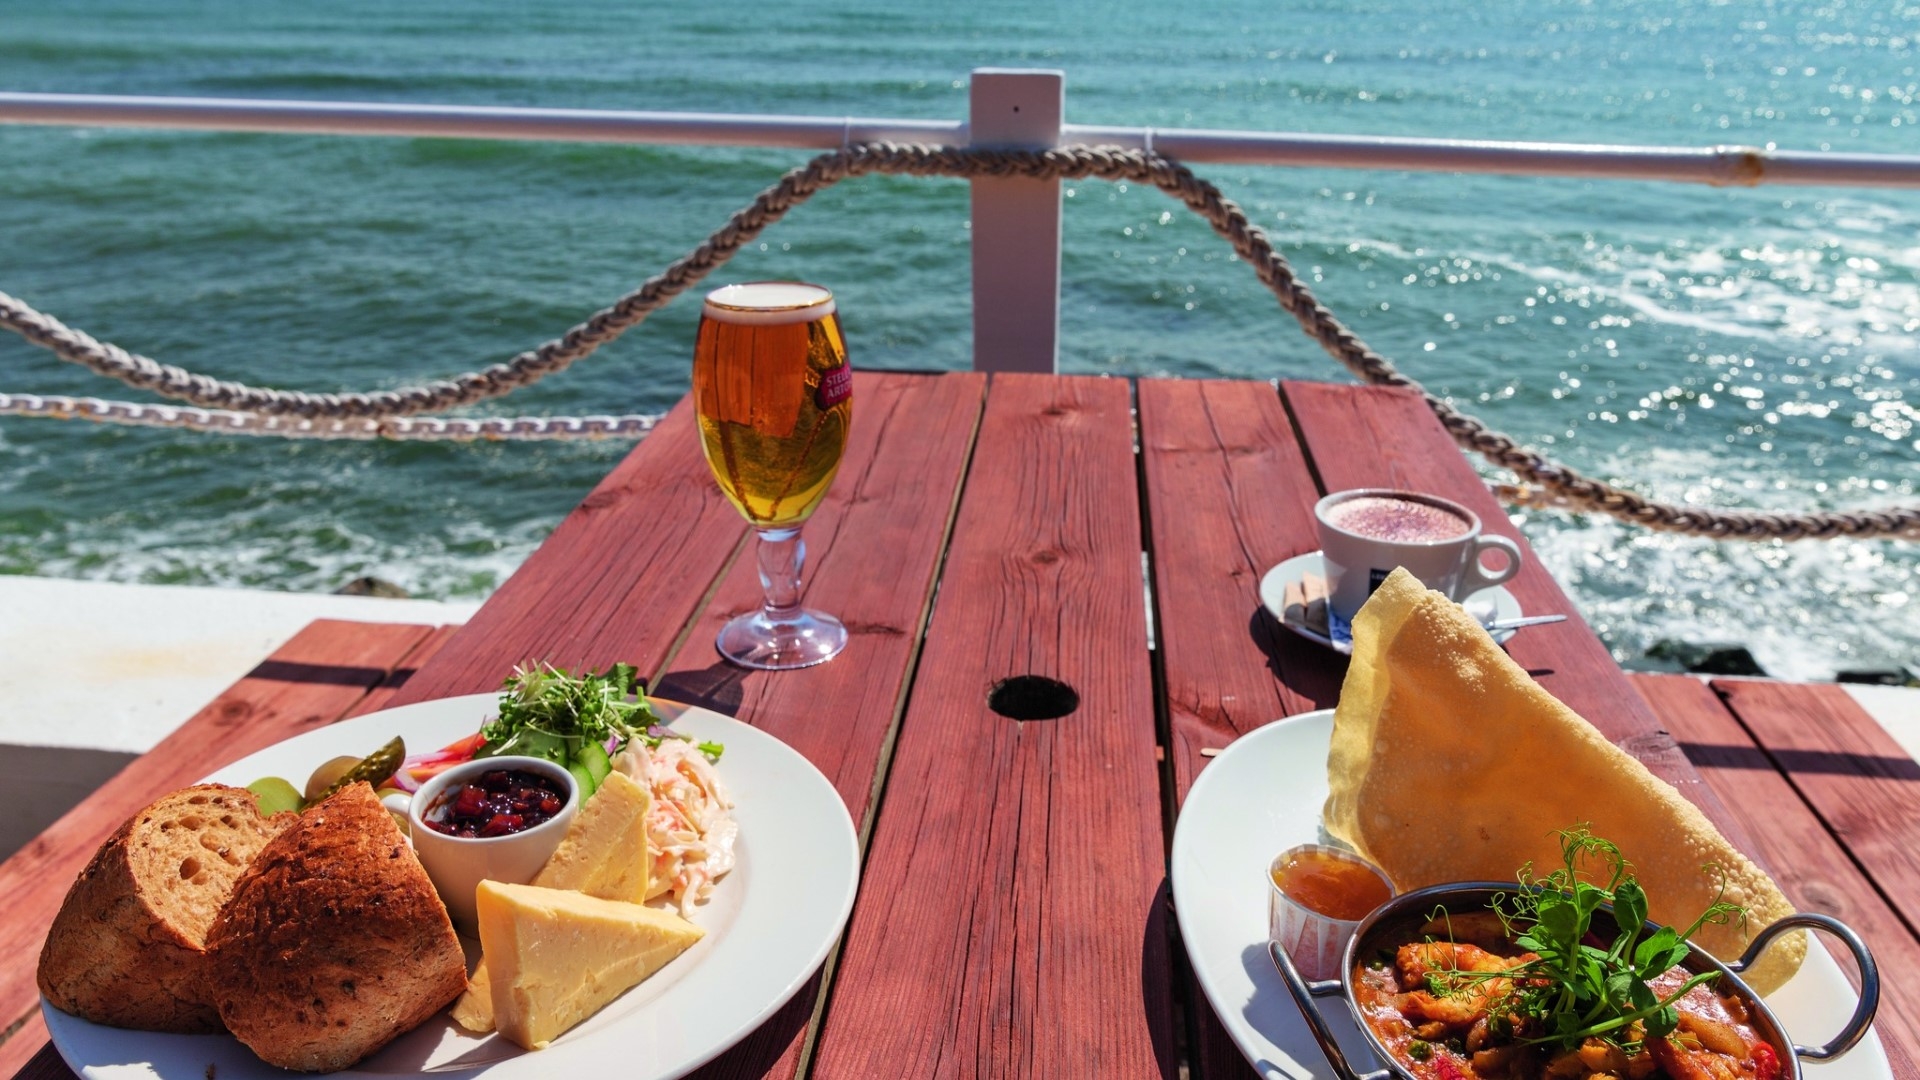 meals on a picnic bench with the sea in the background